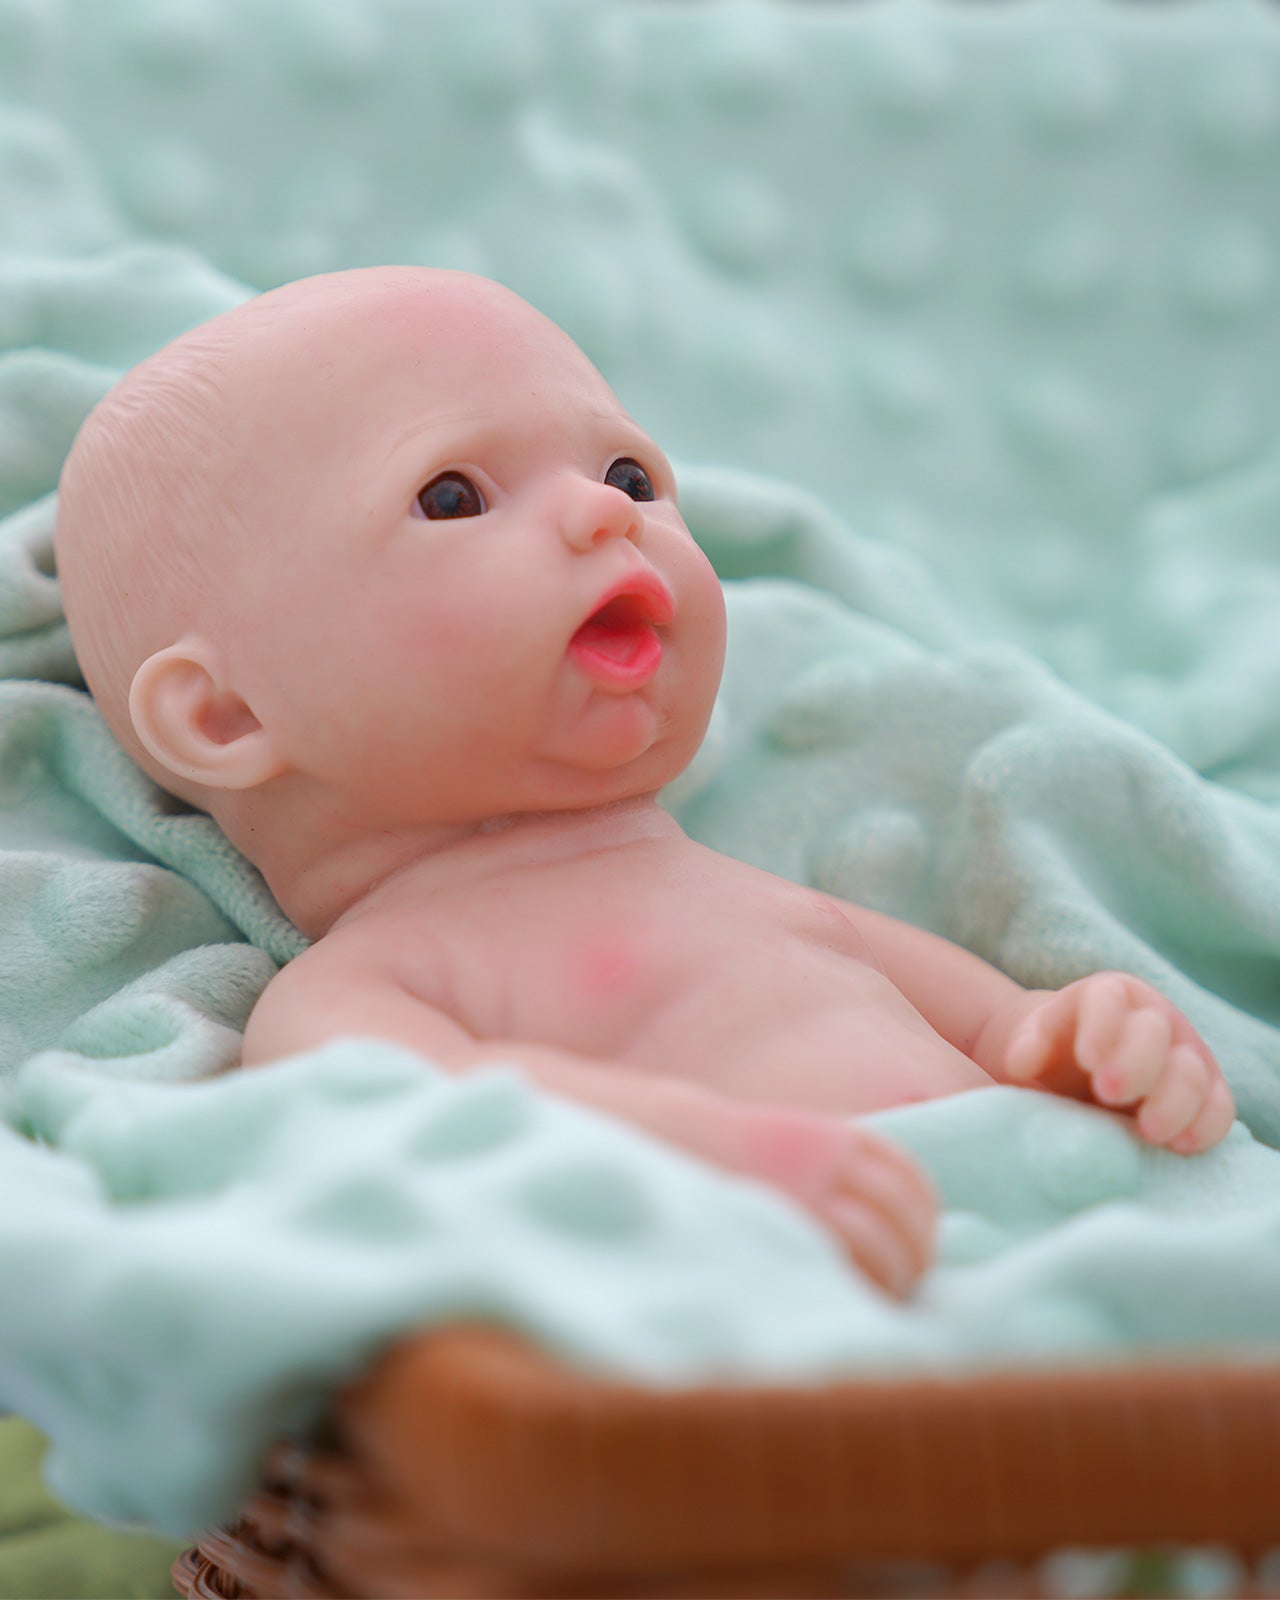 Kelly - 8" Full Silicone Reborn Baby Dolls Humid Pouty Mouth Newborn Girl with Elastic and Smooth Body